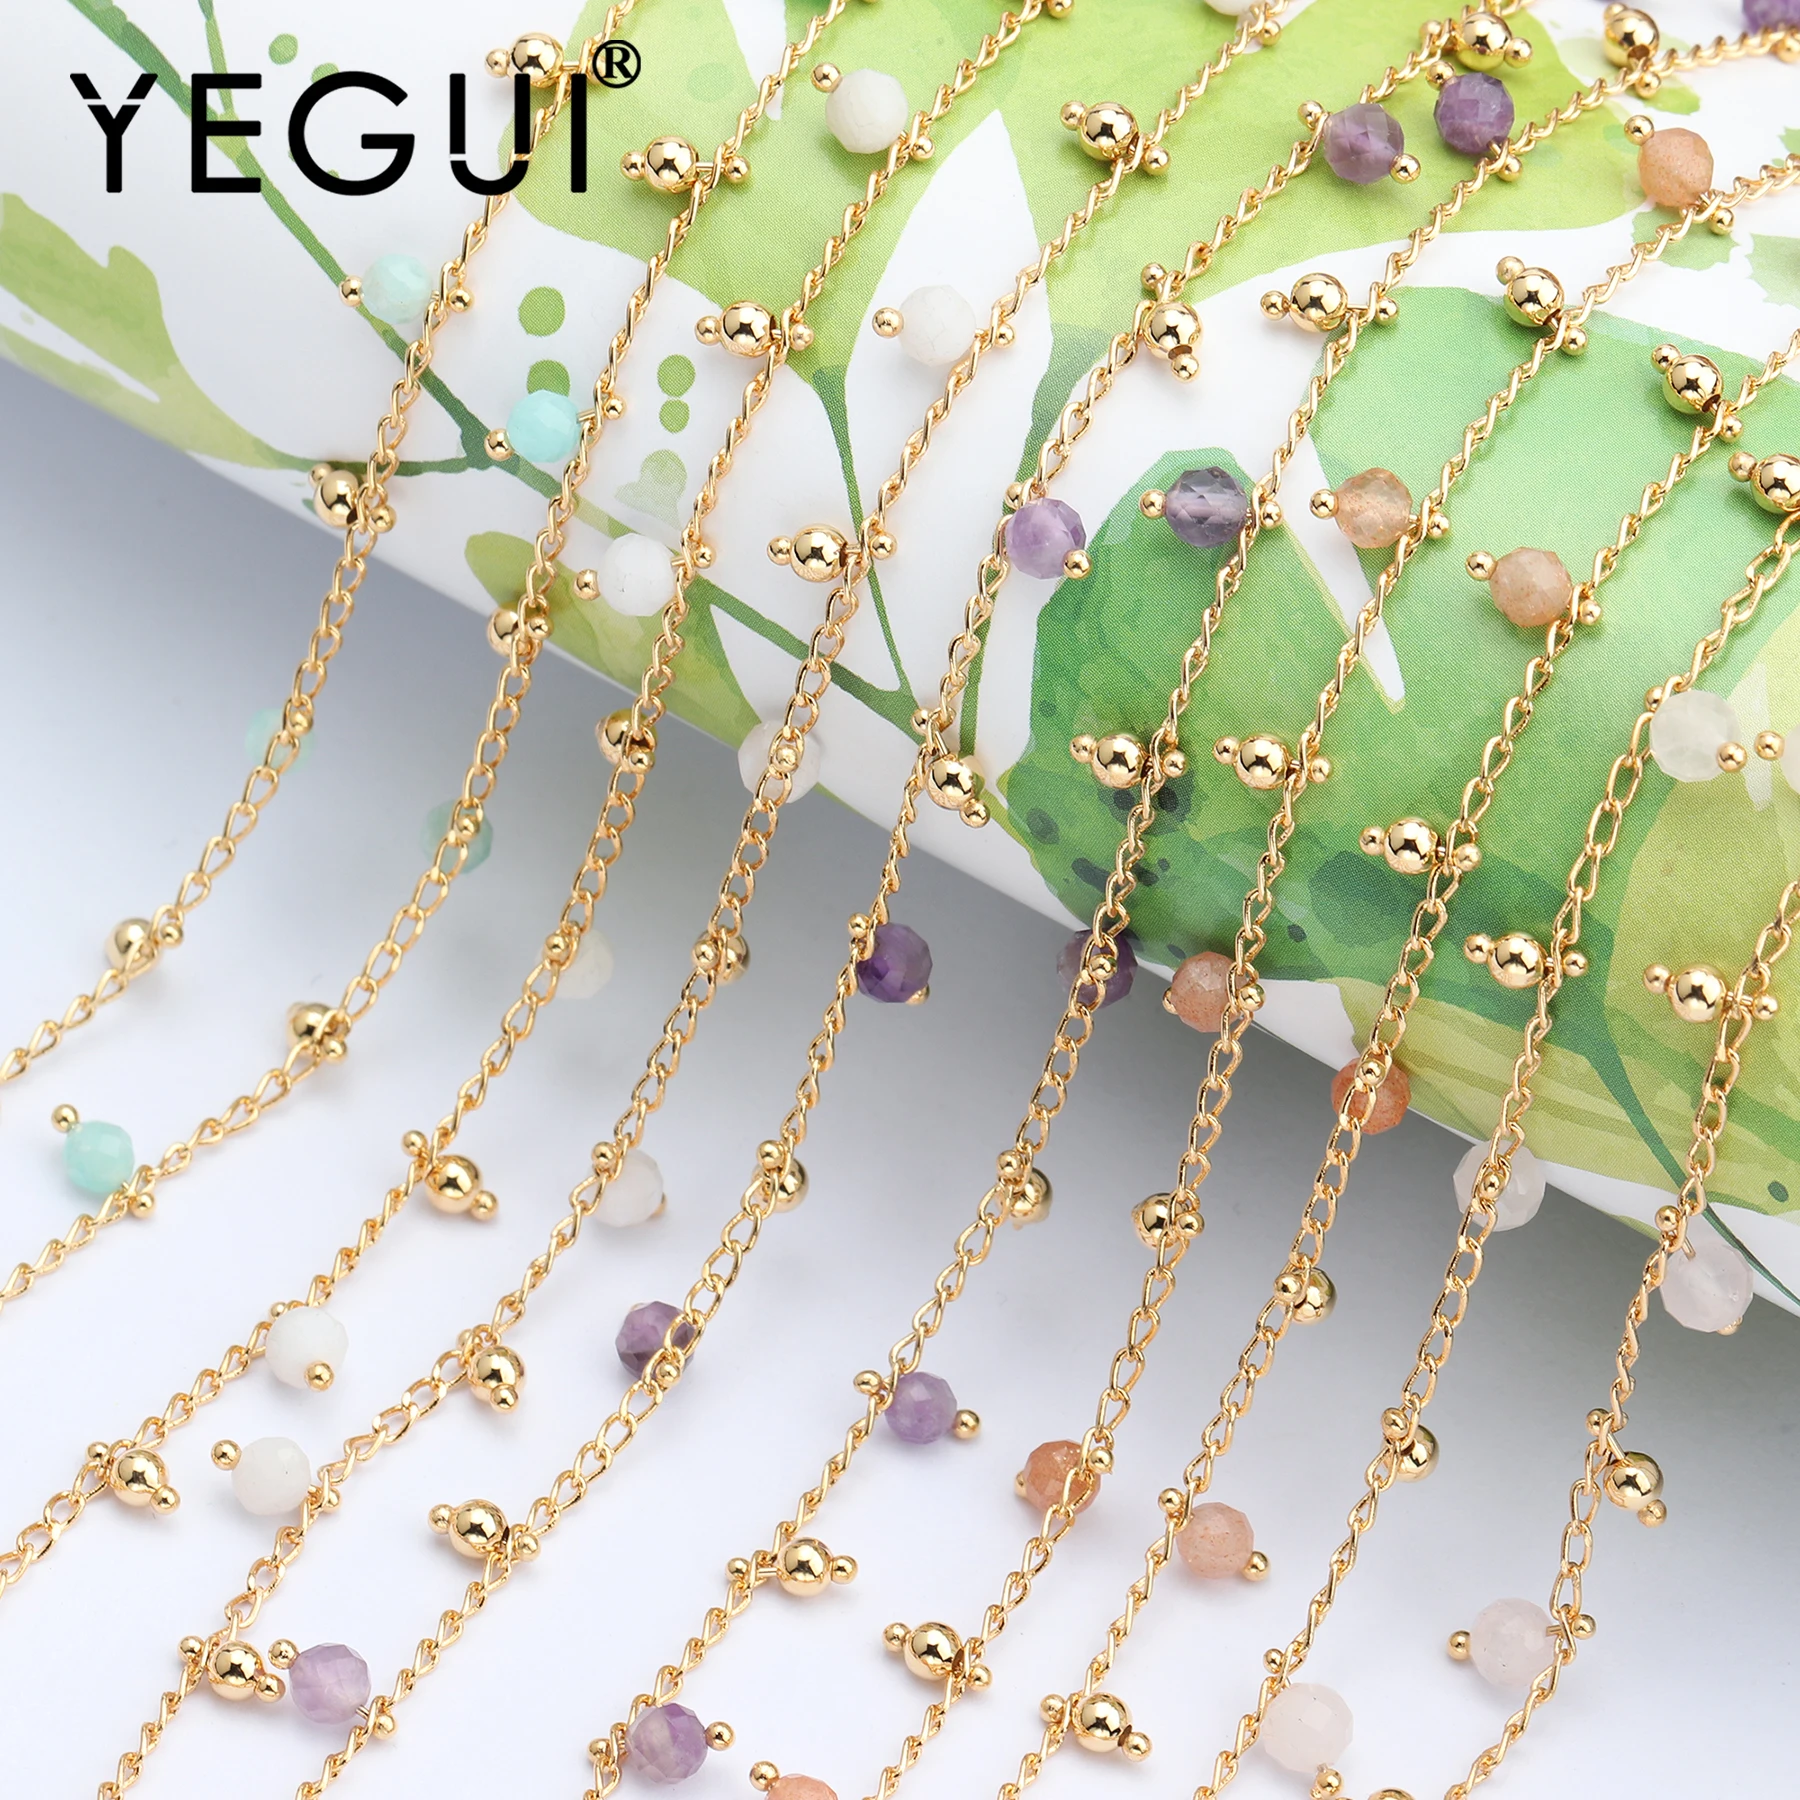 

YEGUI C59,jewelry accessories,18k gold plated,0.3 microns,diy beads chain,jewelry findings,diy necklace,jewelry making,1m/lot